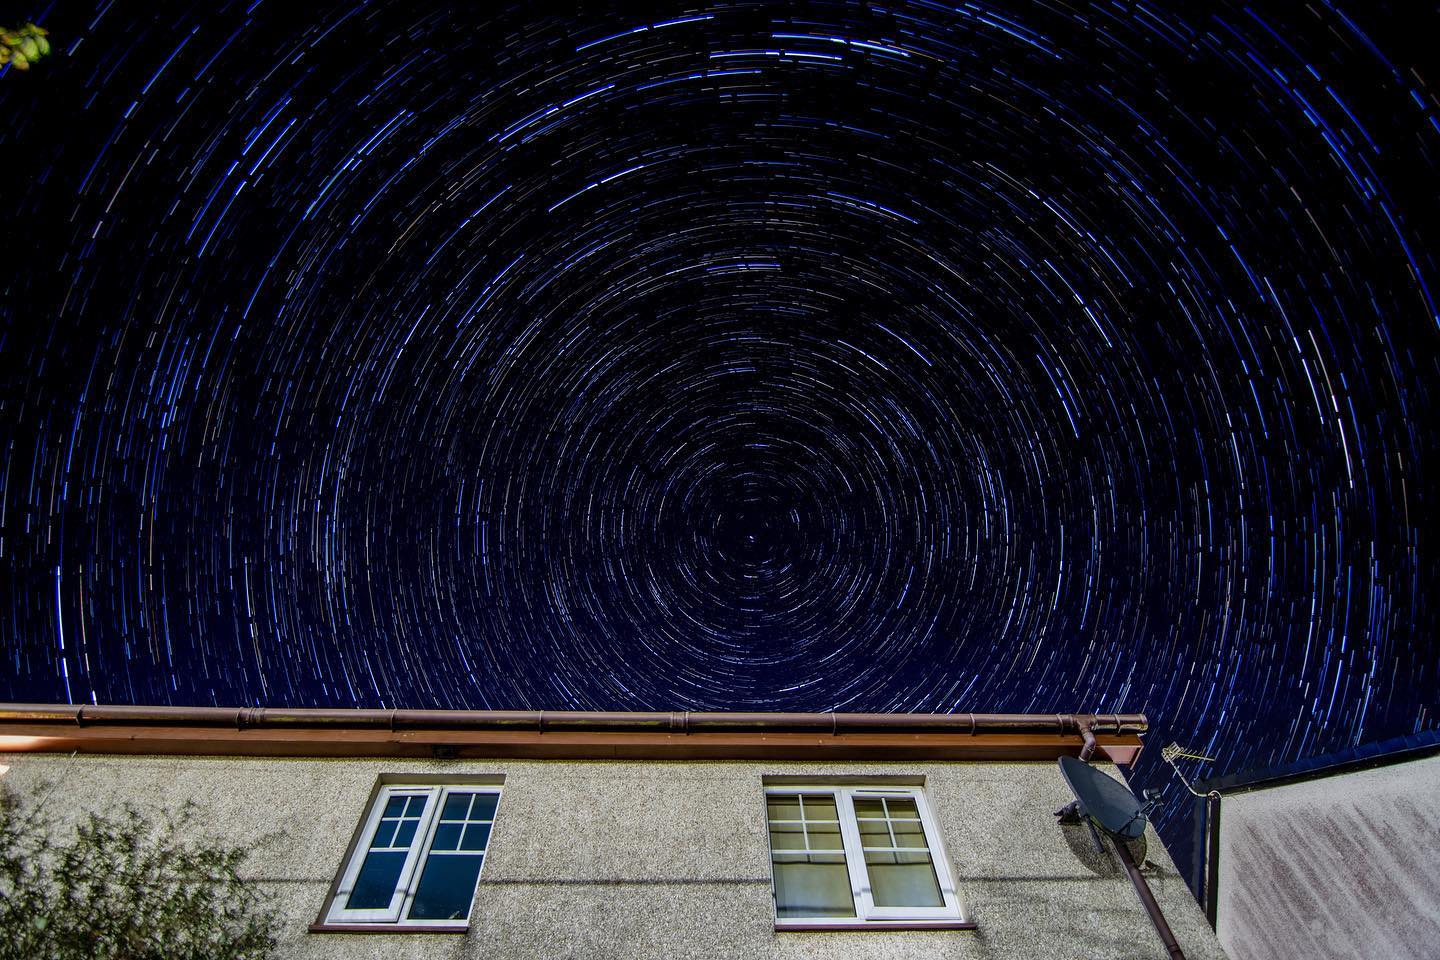 As can’t get anywhere for milky way photos it’s star trails from garden